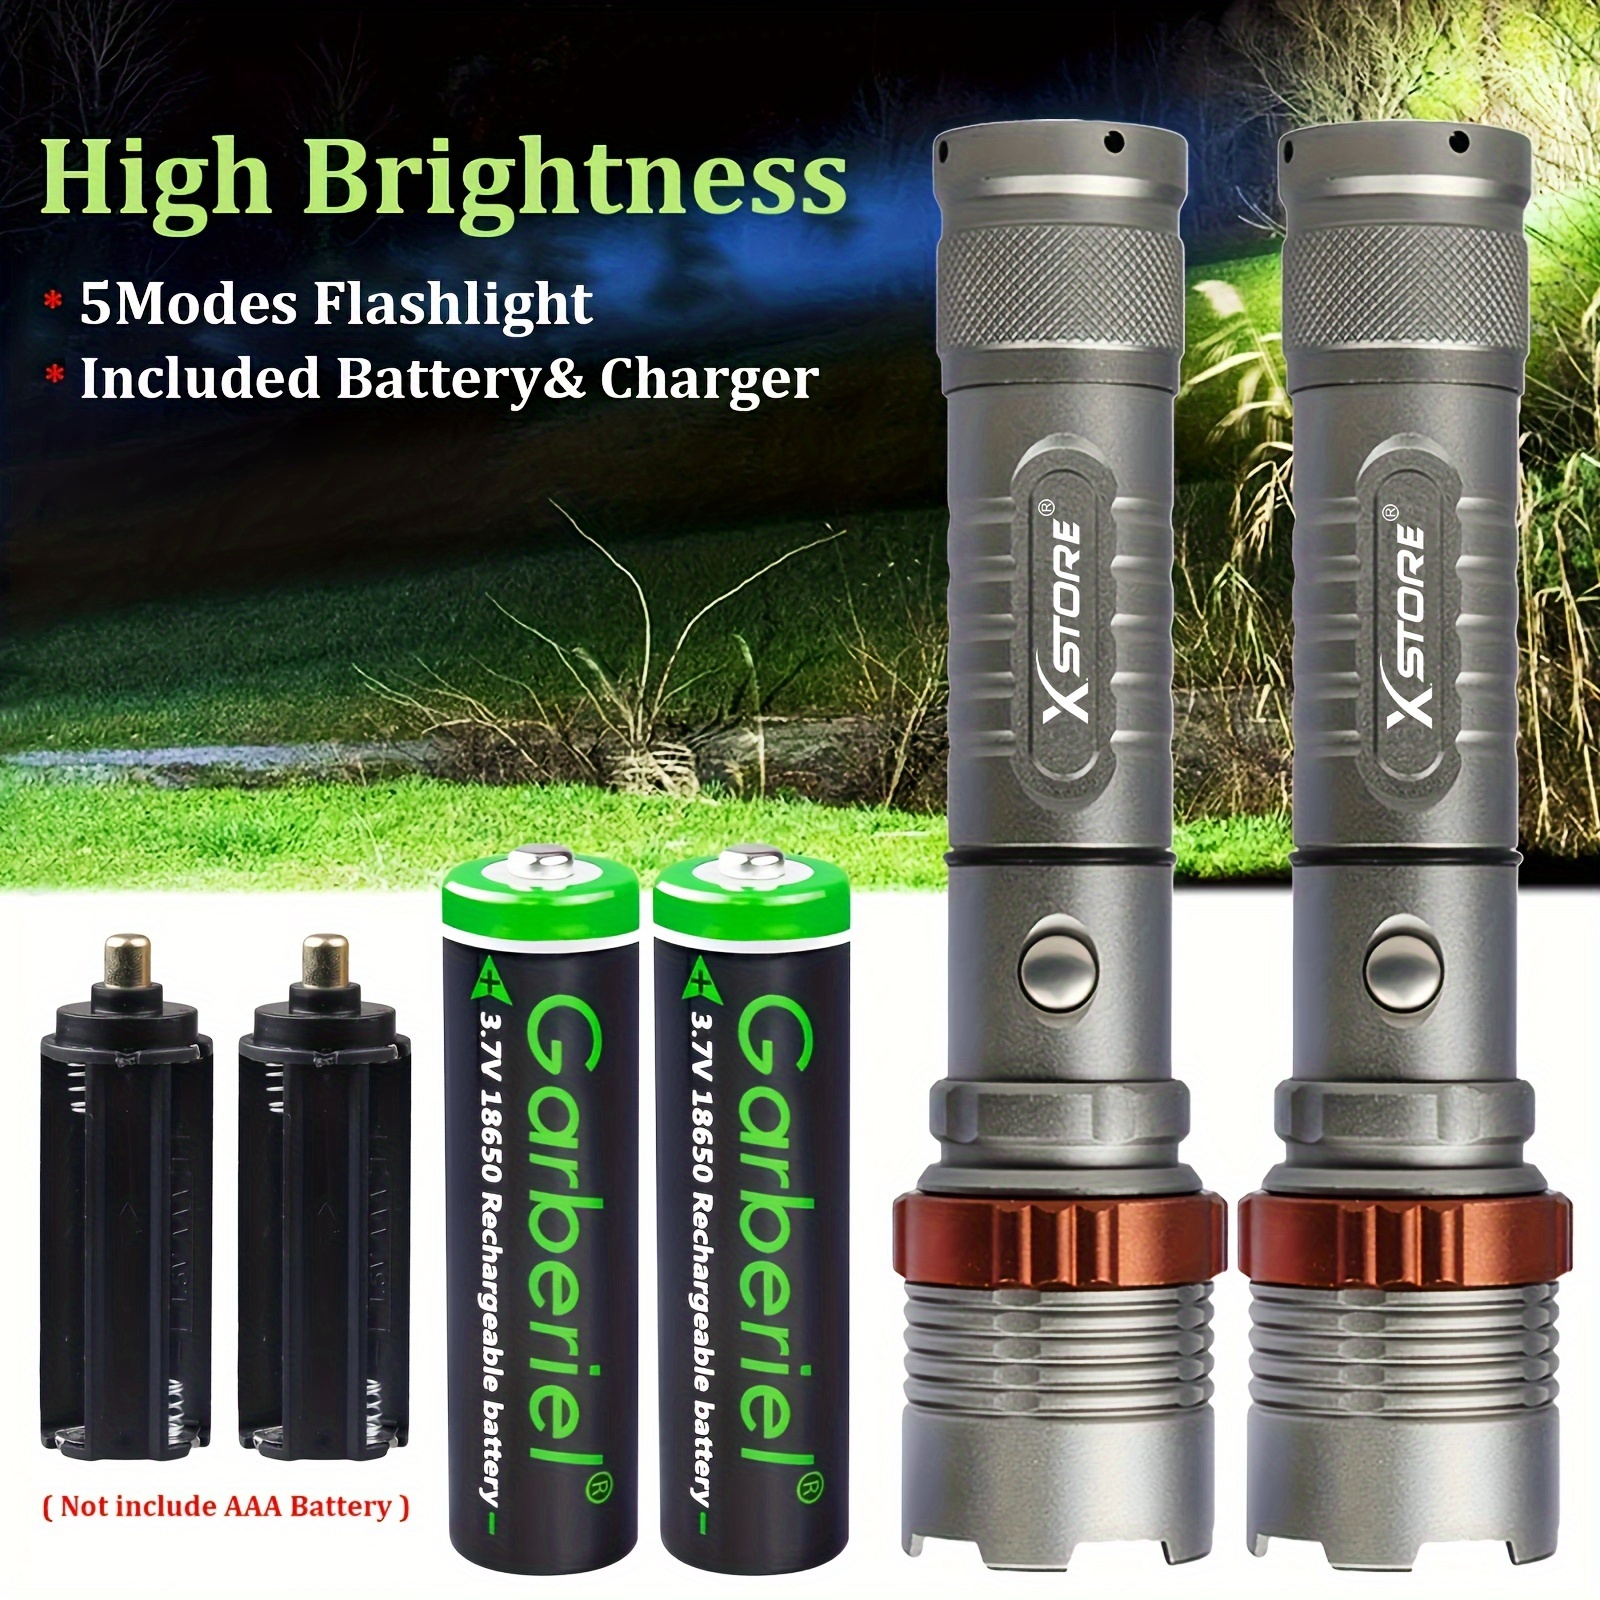 

2 Packs Bright Rechargeable Led Flashlight, 5 Modes Waterproof Zoom Torch With18650 Battery And Charger For Emergencies, Mountaineering, Camping, Hiking